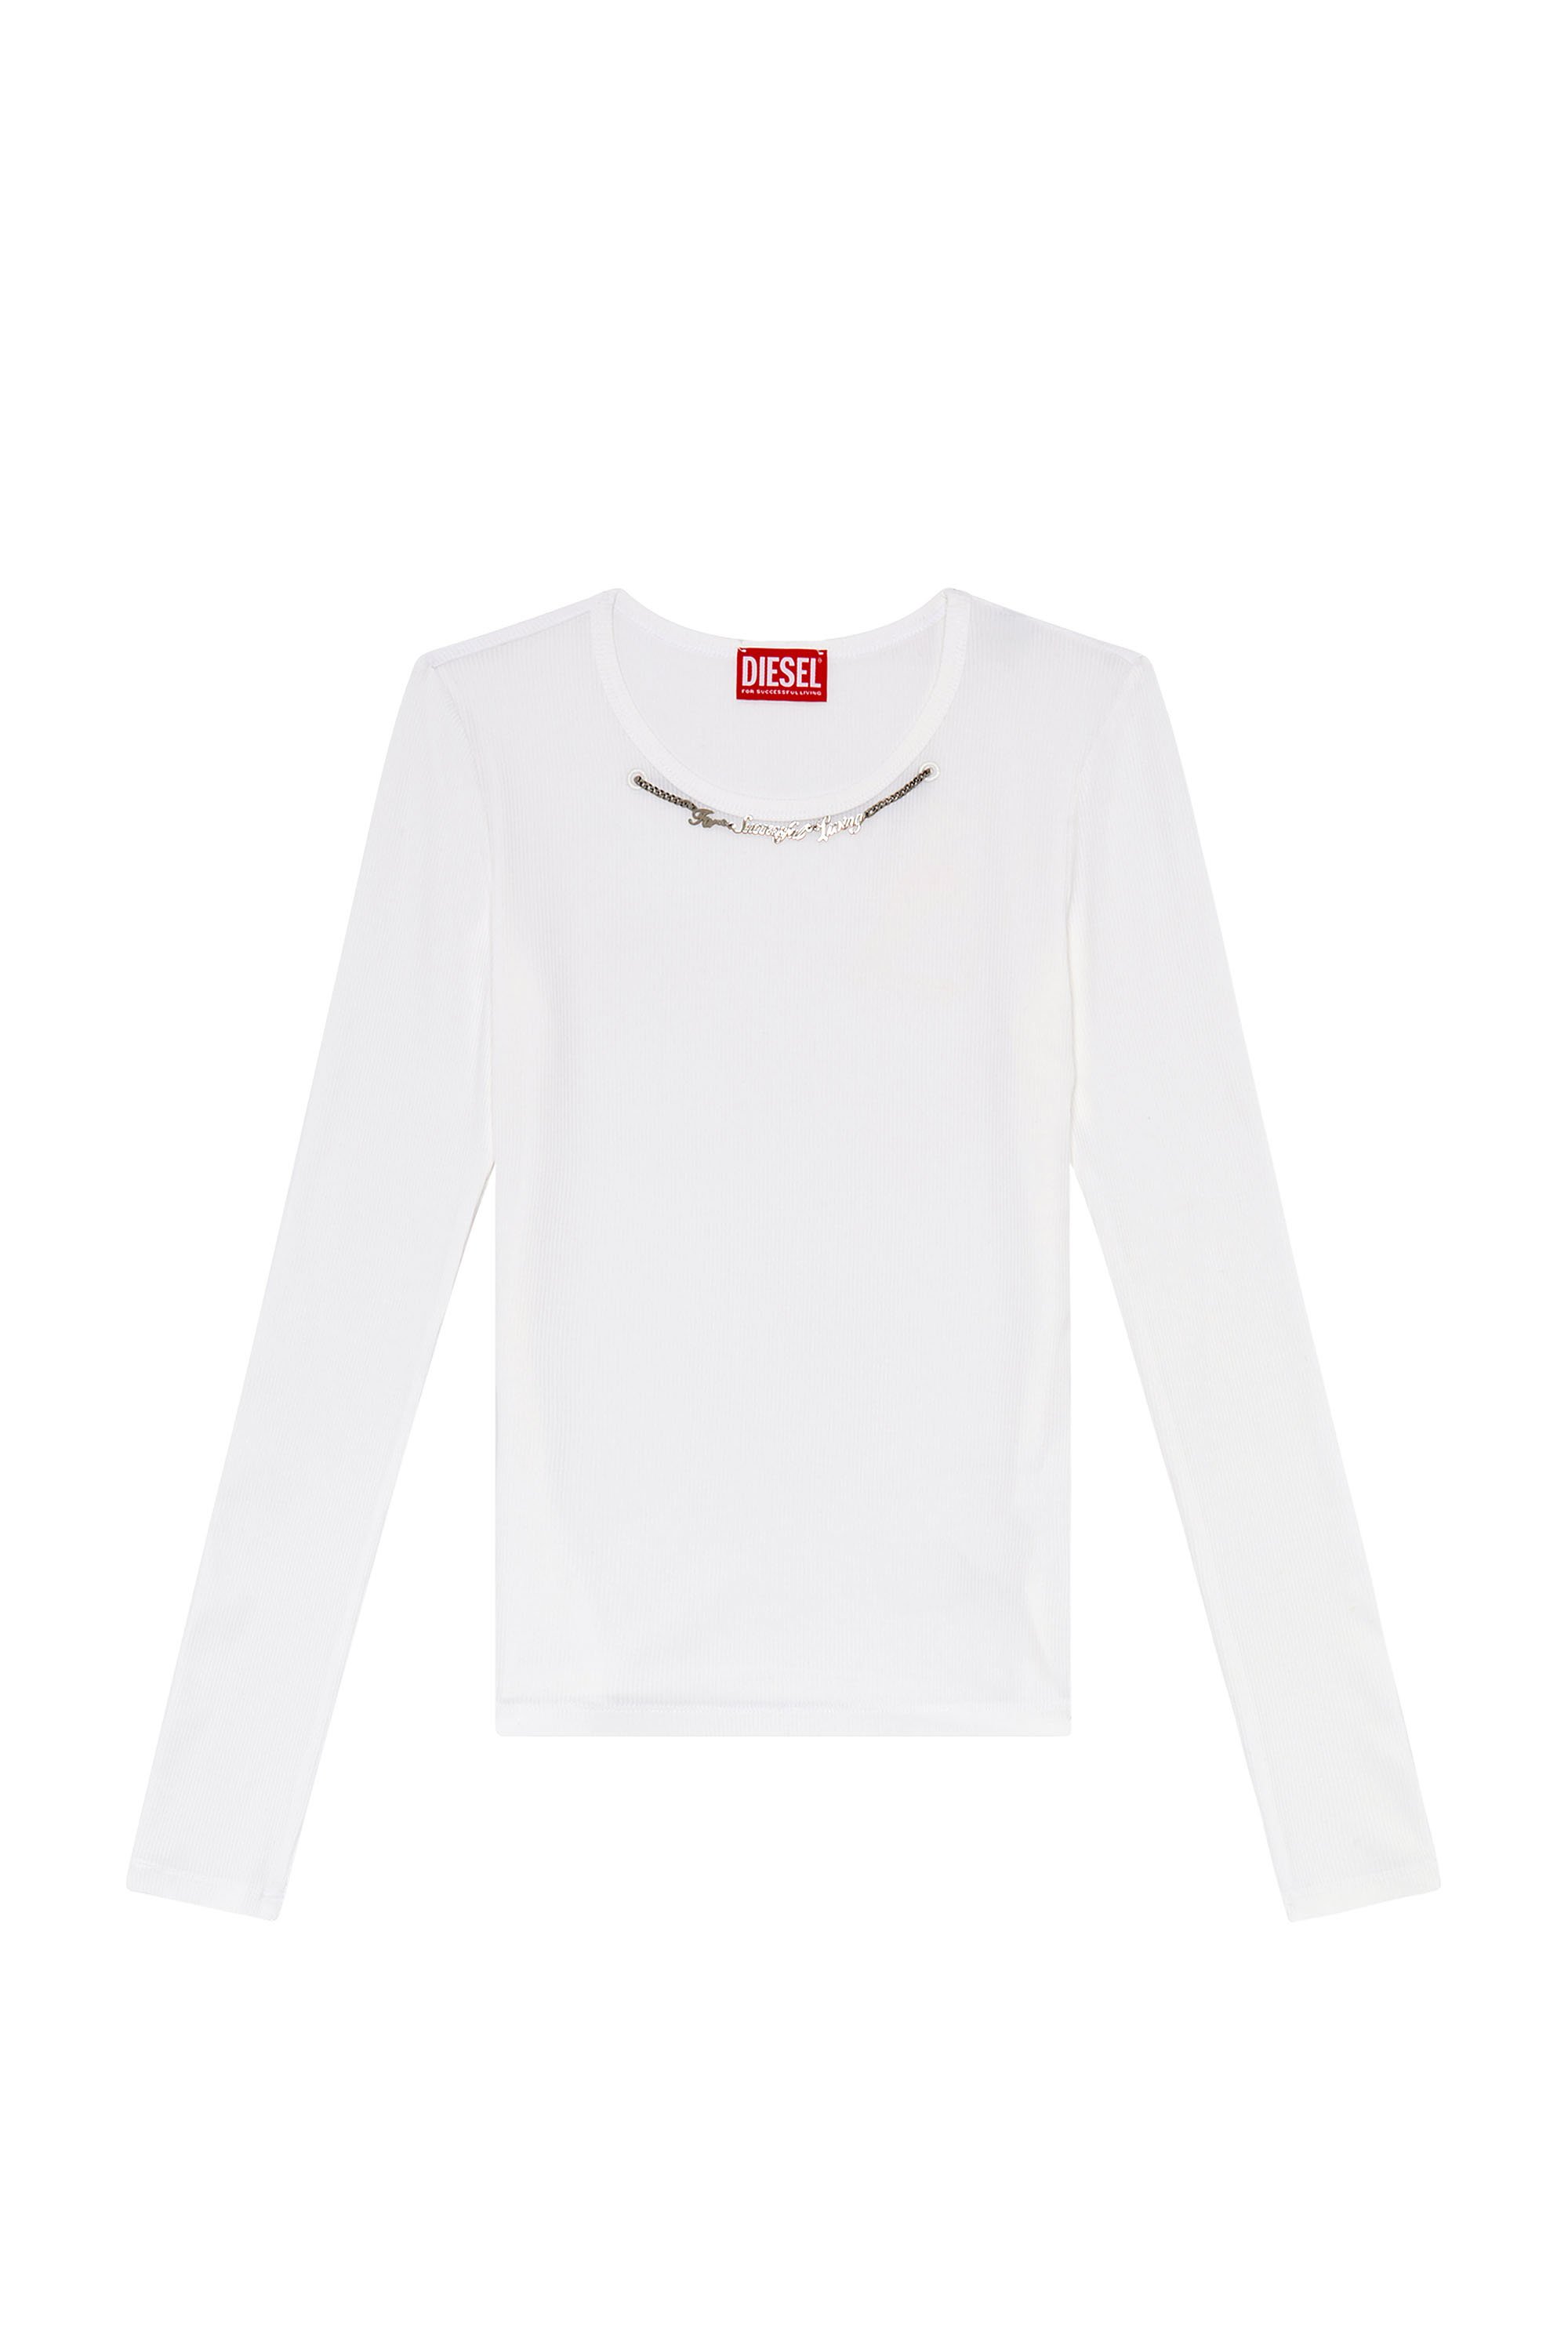 Diesel - T-MATIC-LS, Woman Long-sleeve top with chain necklace in White - Image 5